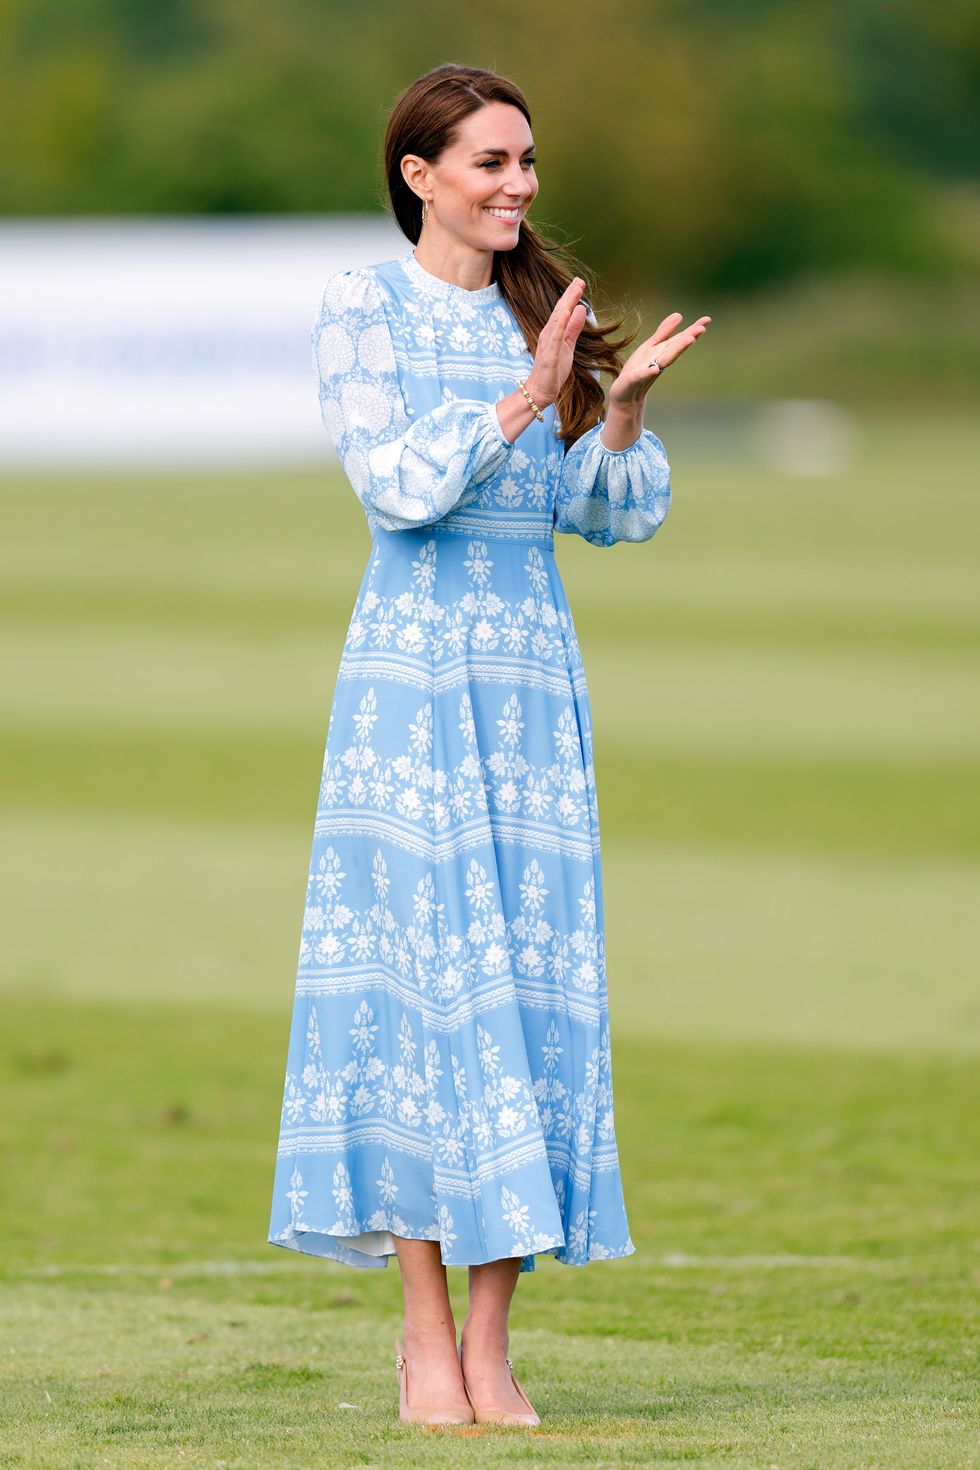 Kate Middleton's Best Style Moments Through the Years